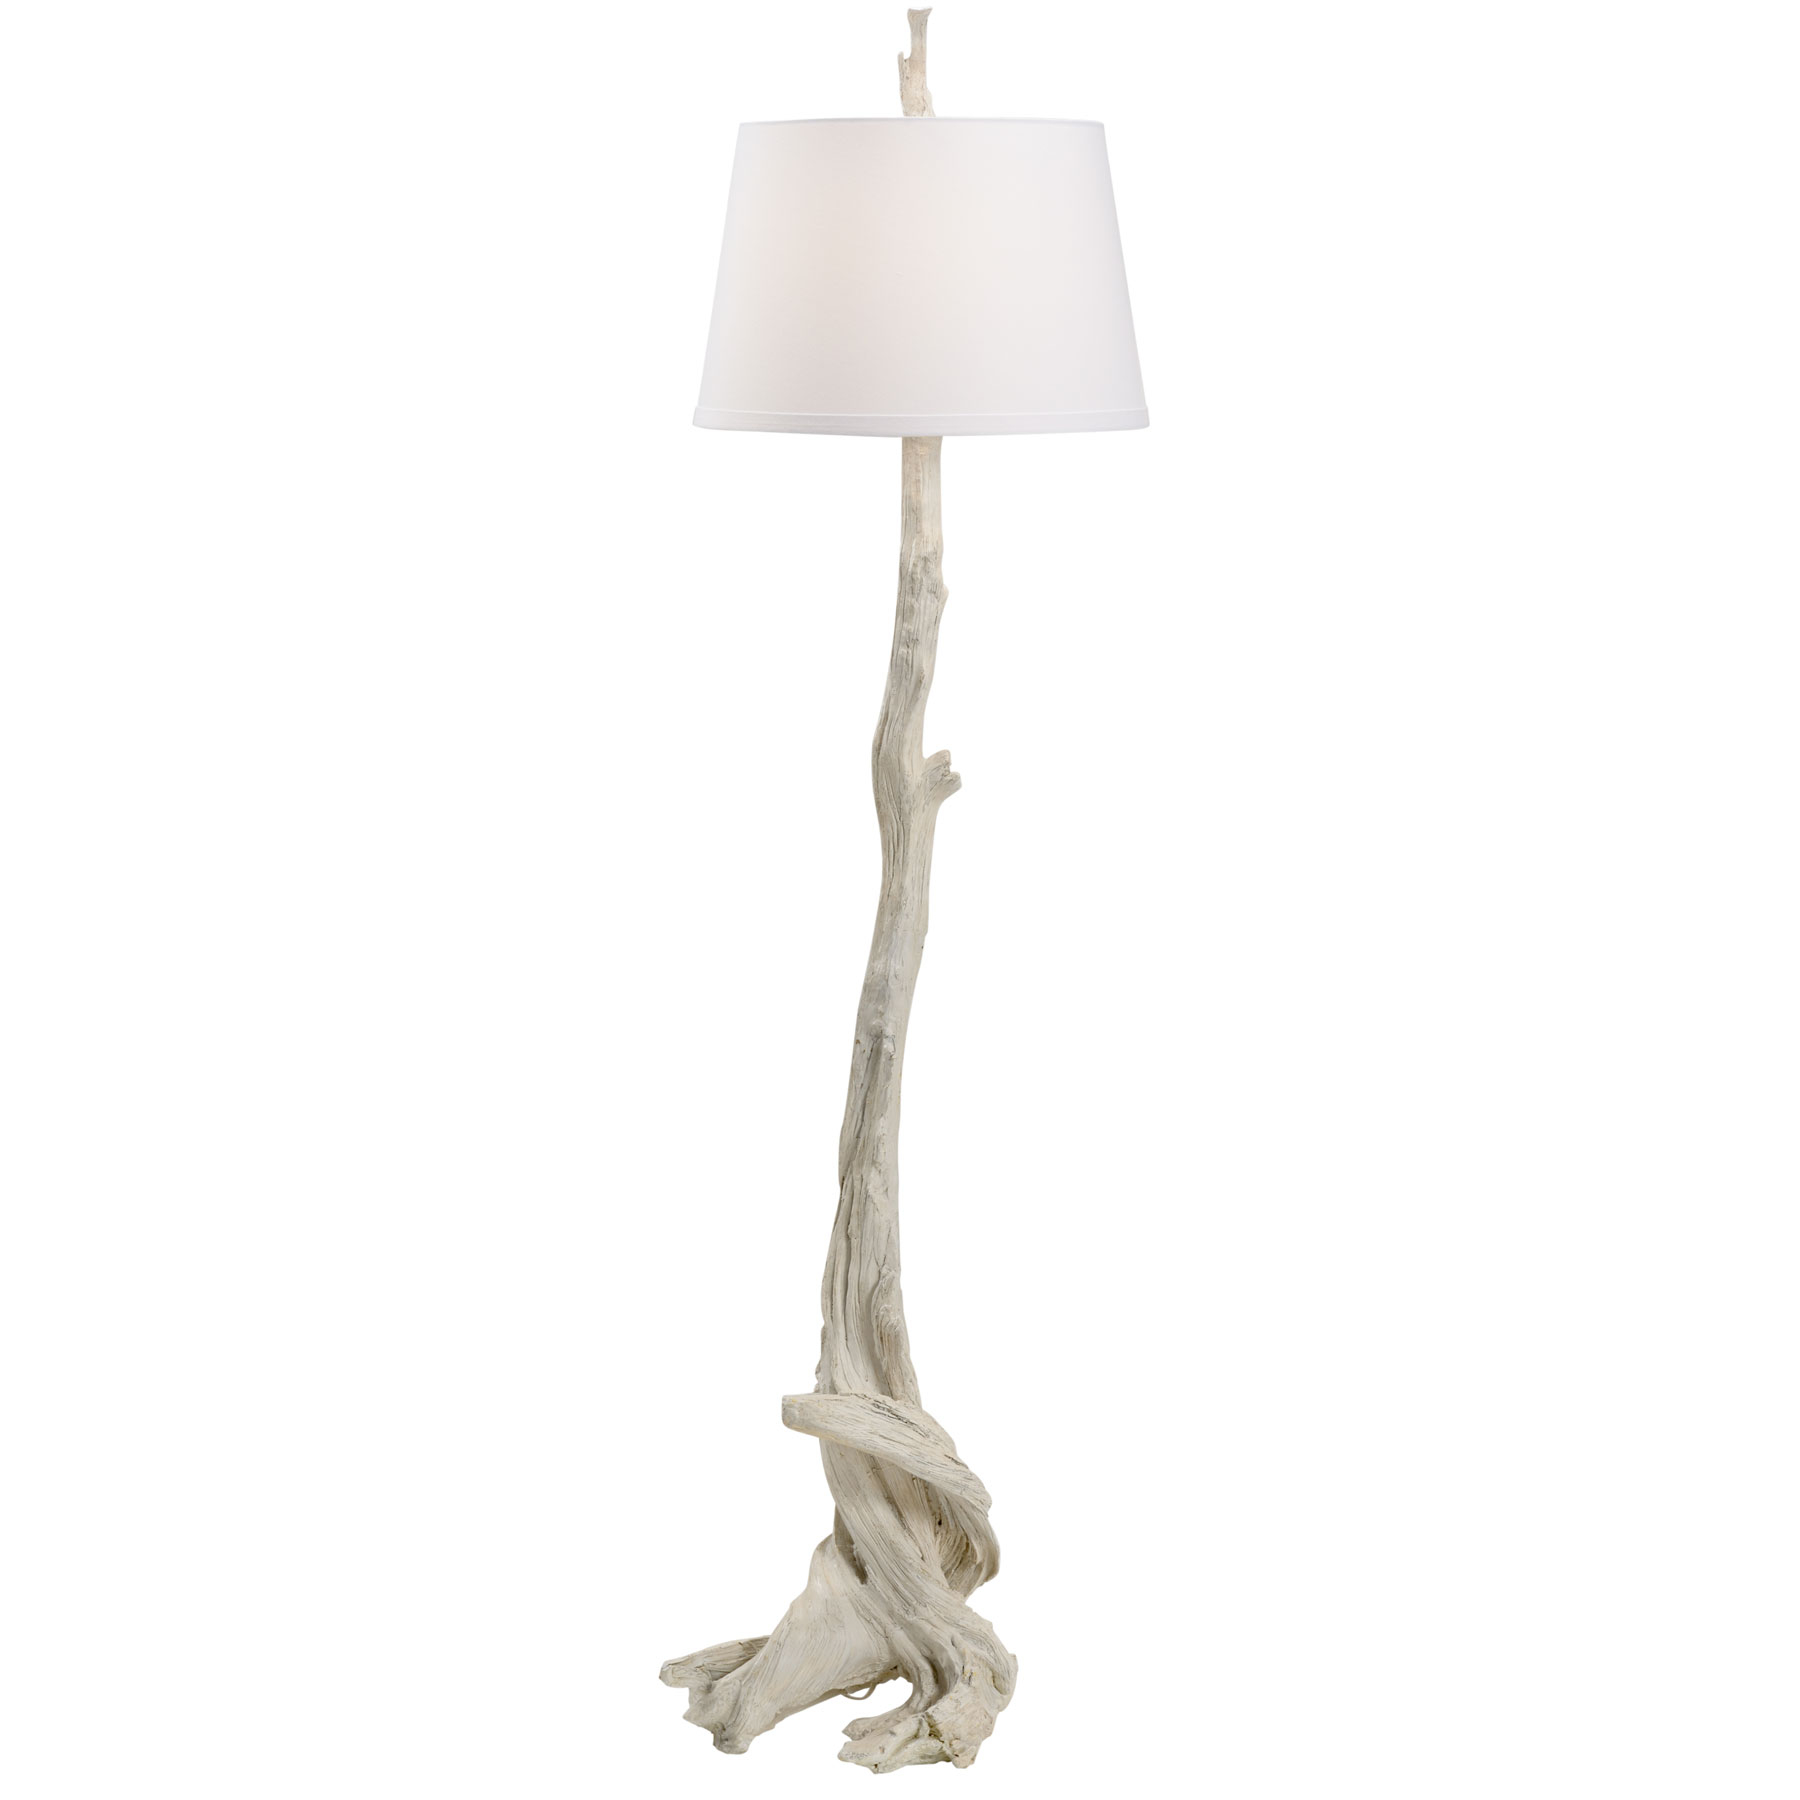 Driftwood Shaped Floor Lamp throughout size 1800 X 1800